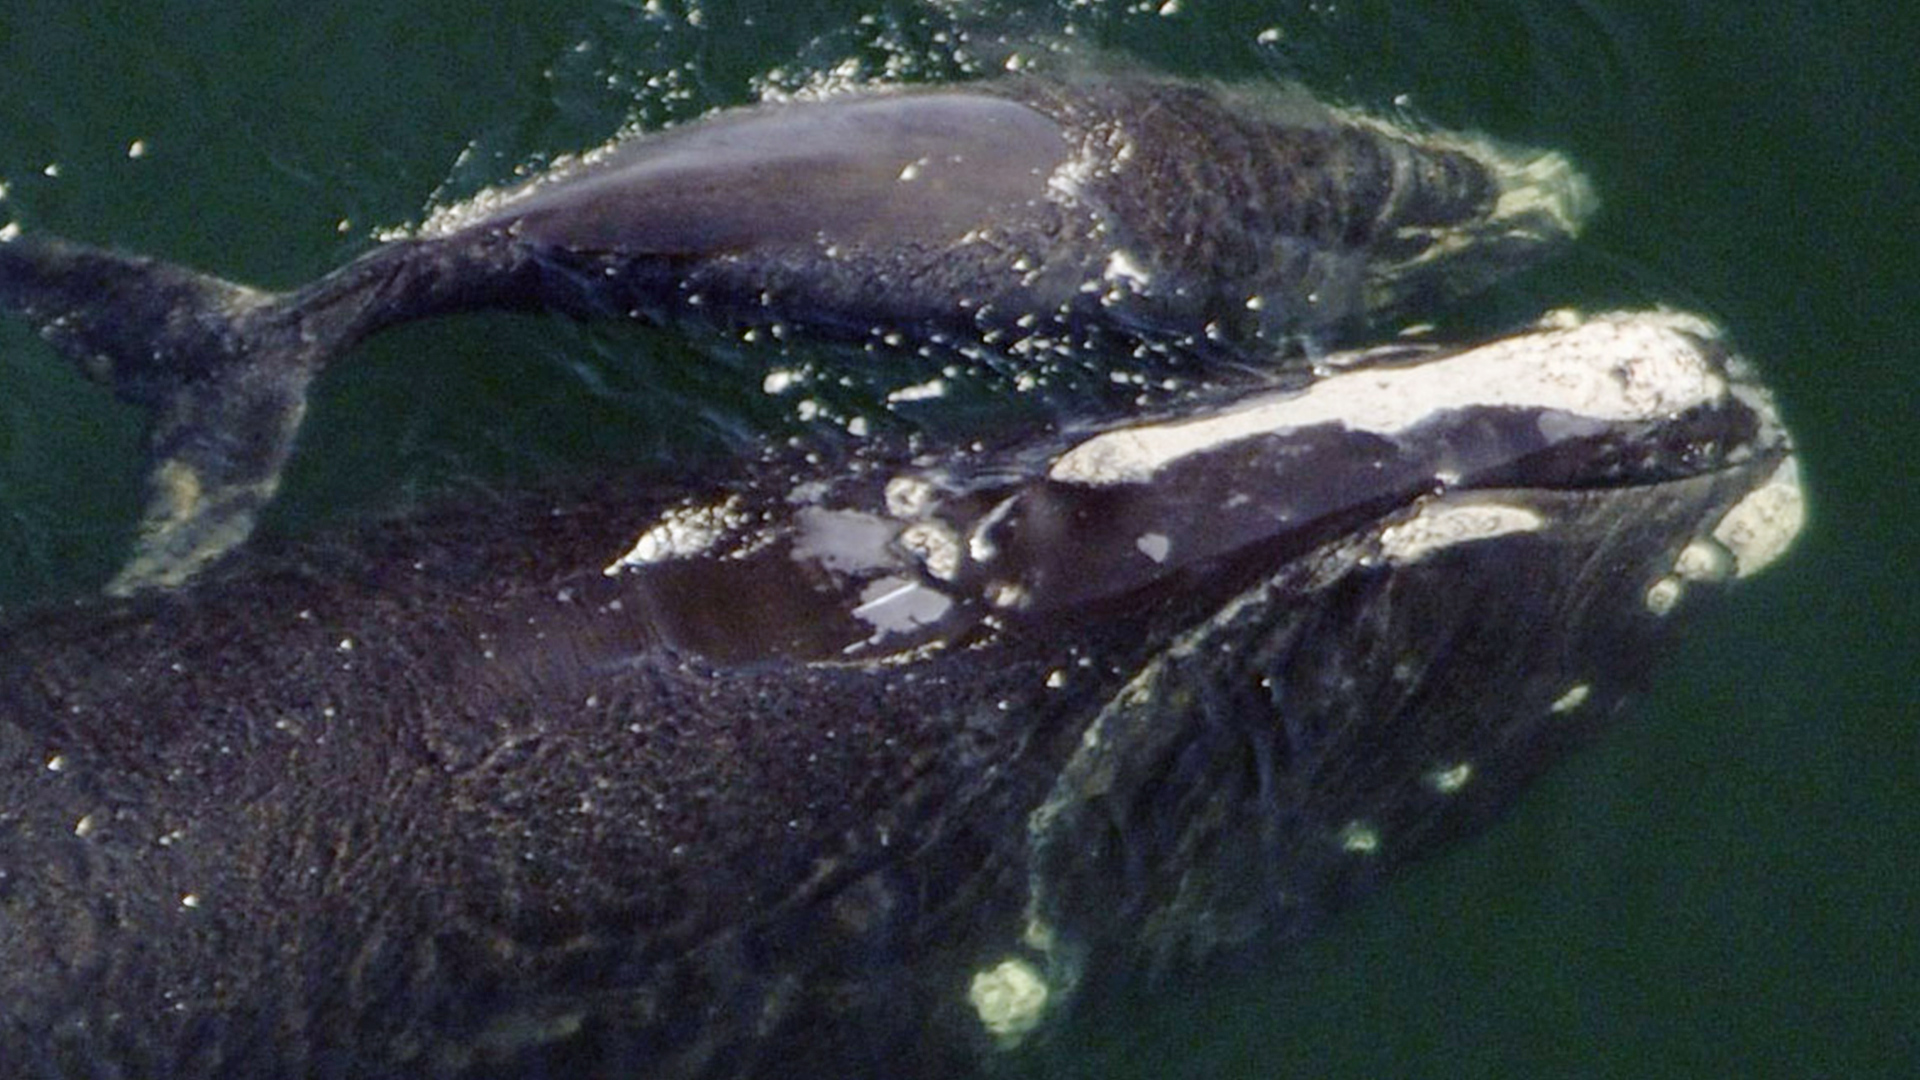 Right whale visible through the clear water with a calf at its side. The top of the head and blowhole break the water surface, but the nostrils are still closed.